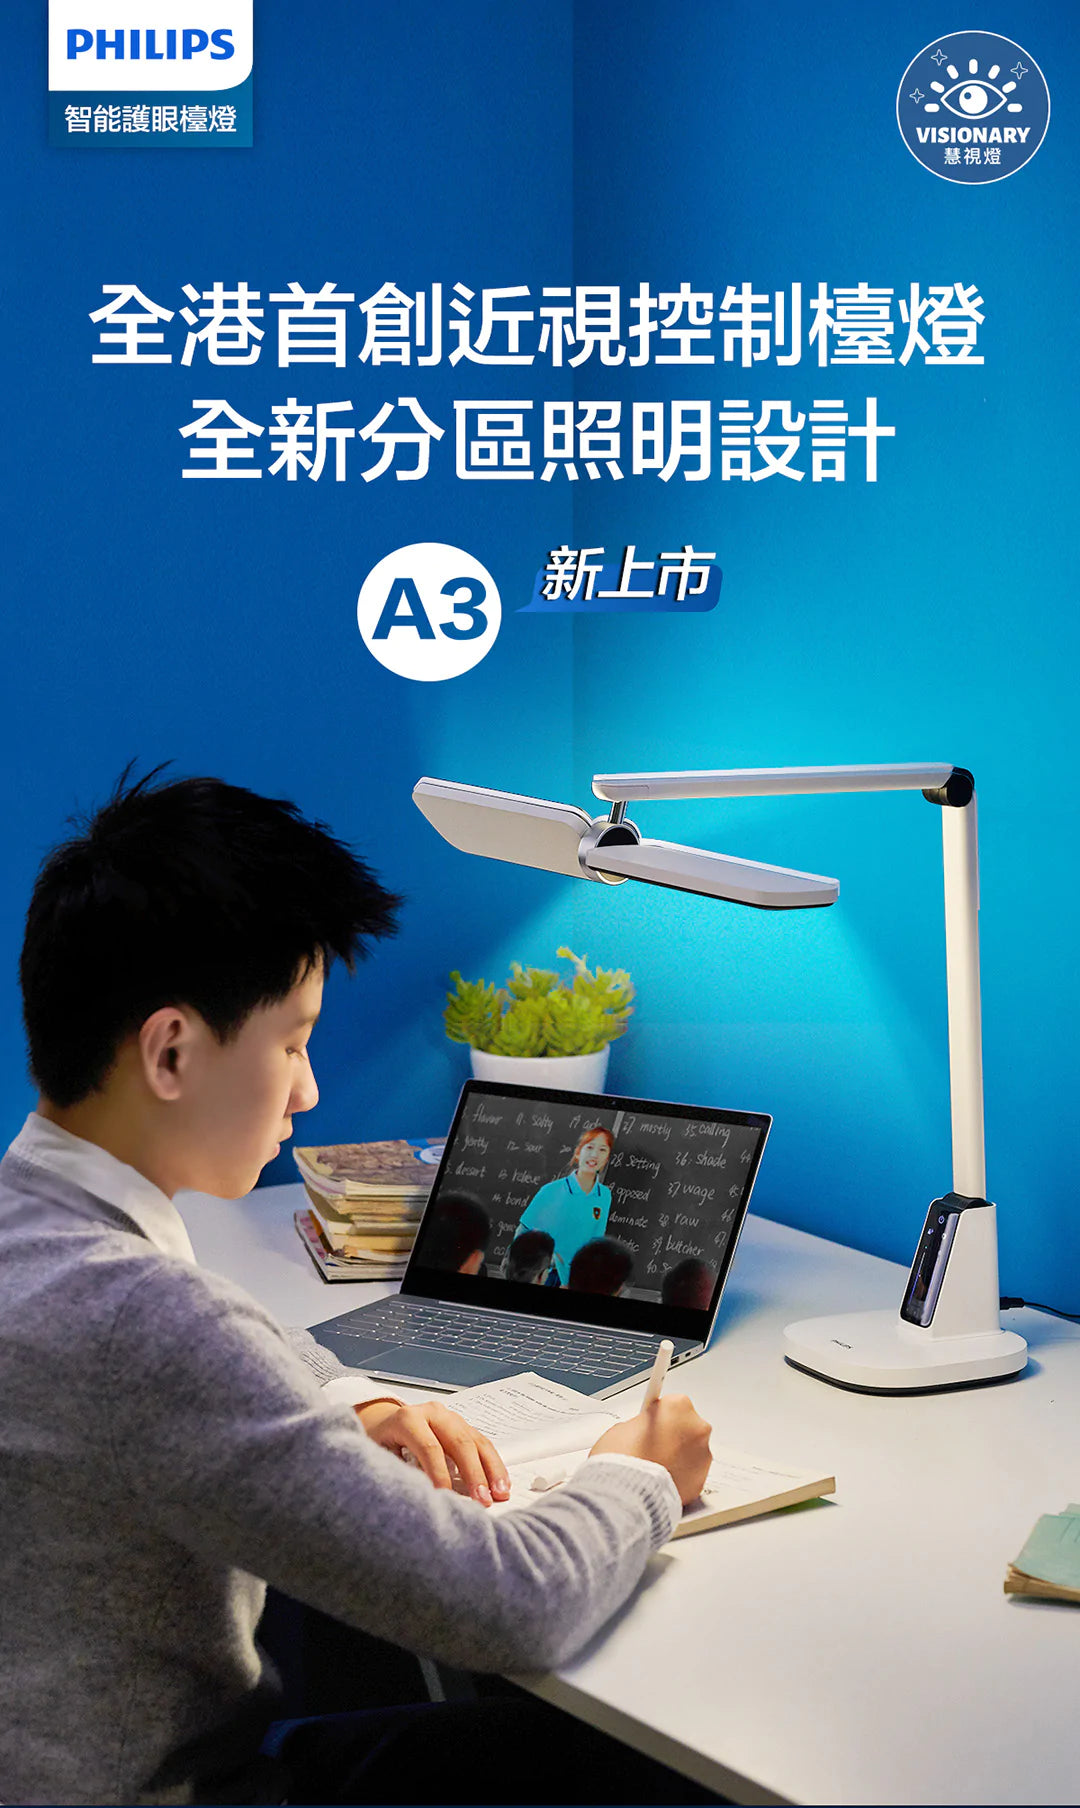 PHILIPS 66157 A3 LED Flagship A3 Smart Eye Protection Desk Lamp